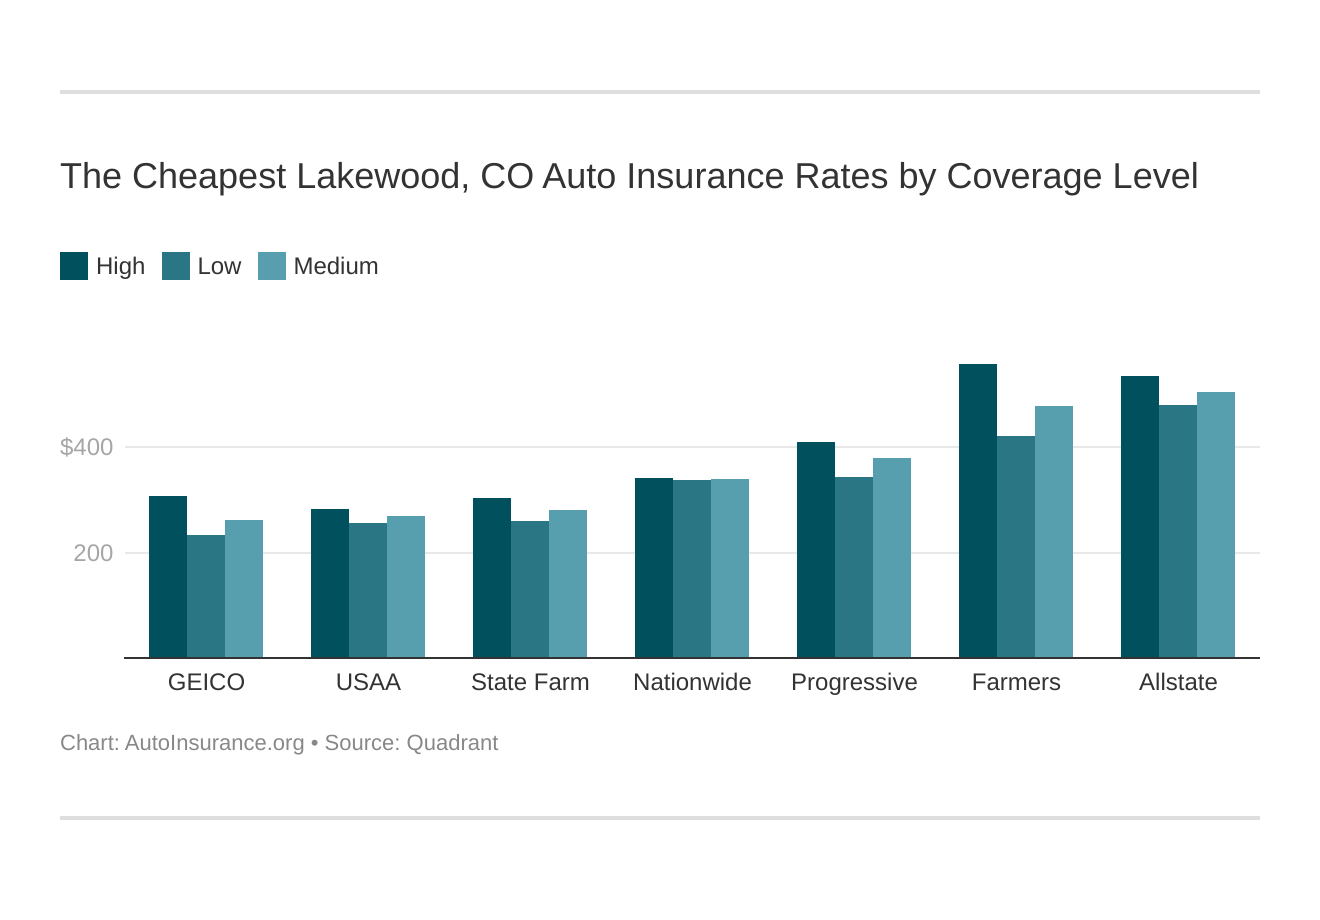 The Cheapest Lakewood, CO Auto Insurance Rates by Coverage Level